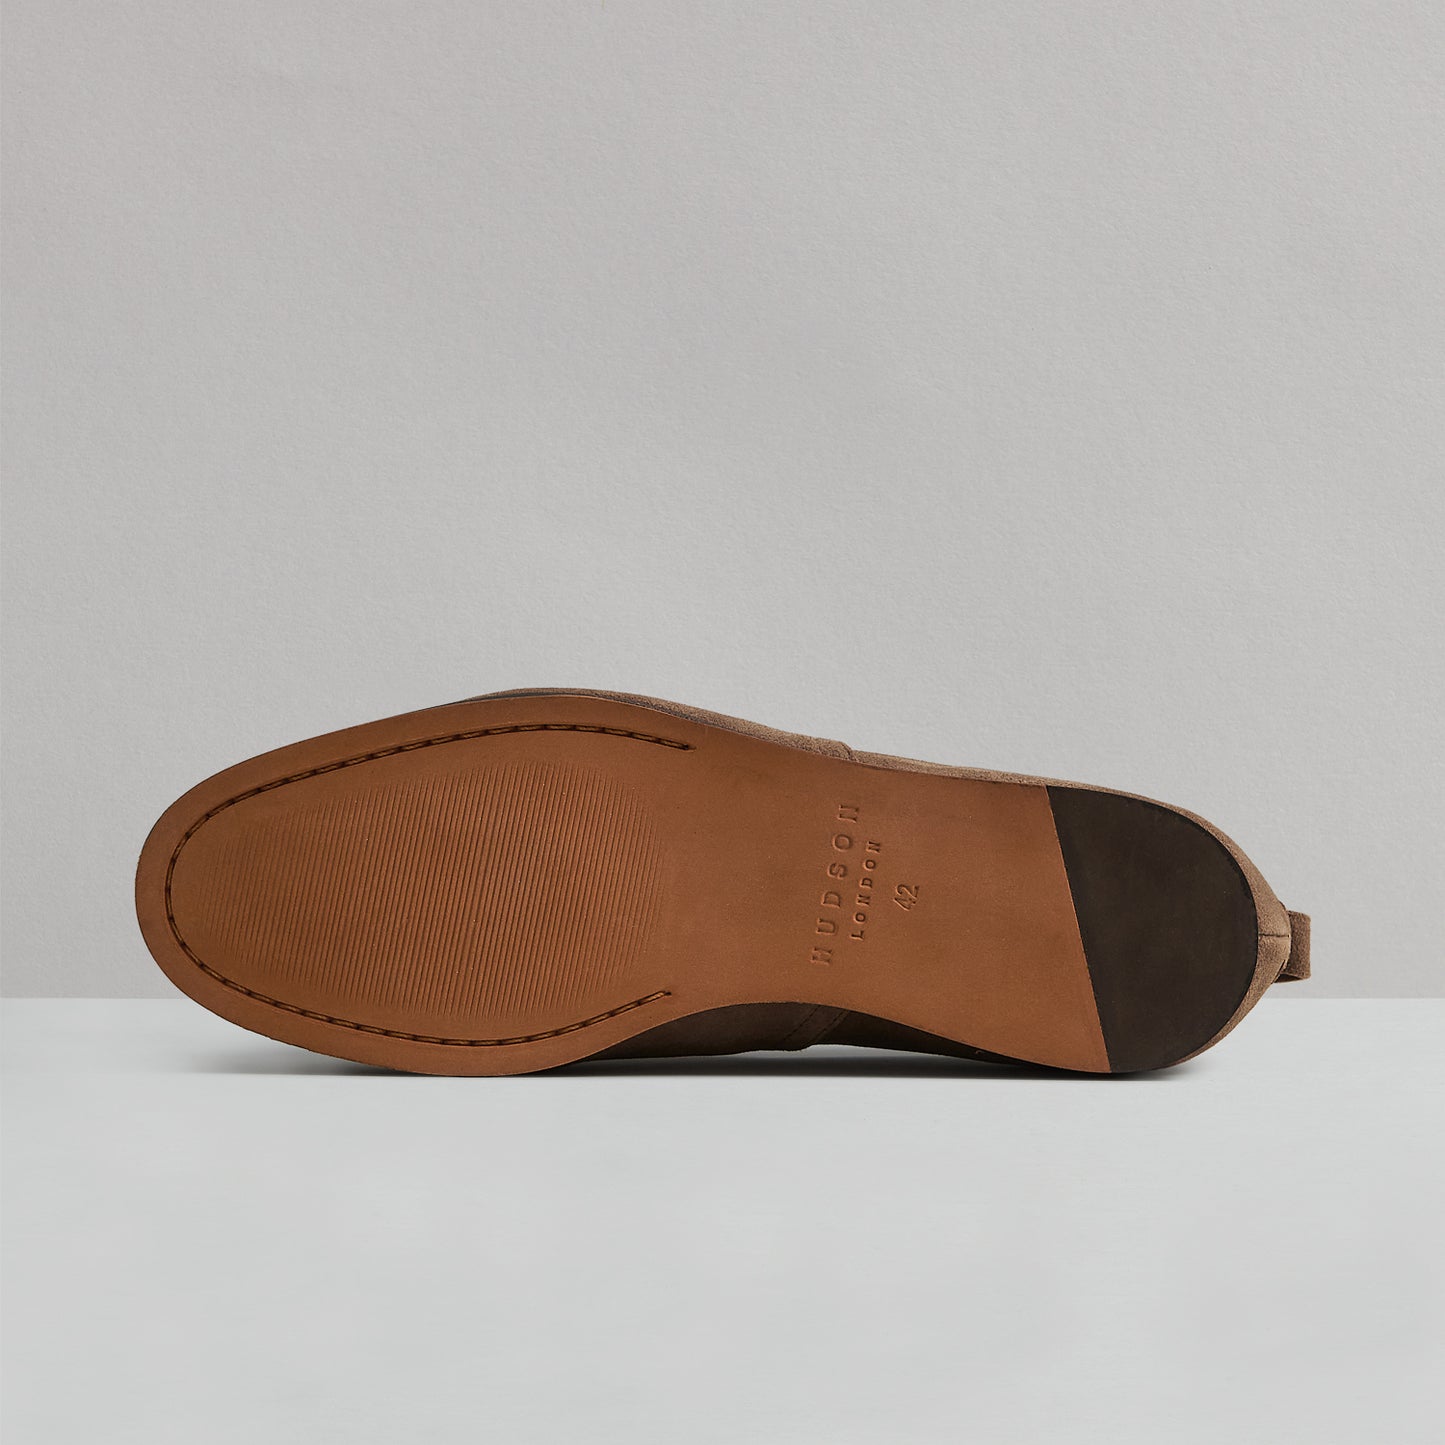 RIGBY KHAKI SUEDE LOAFER